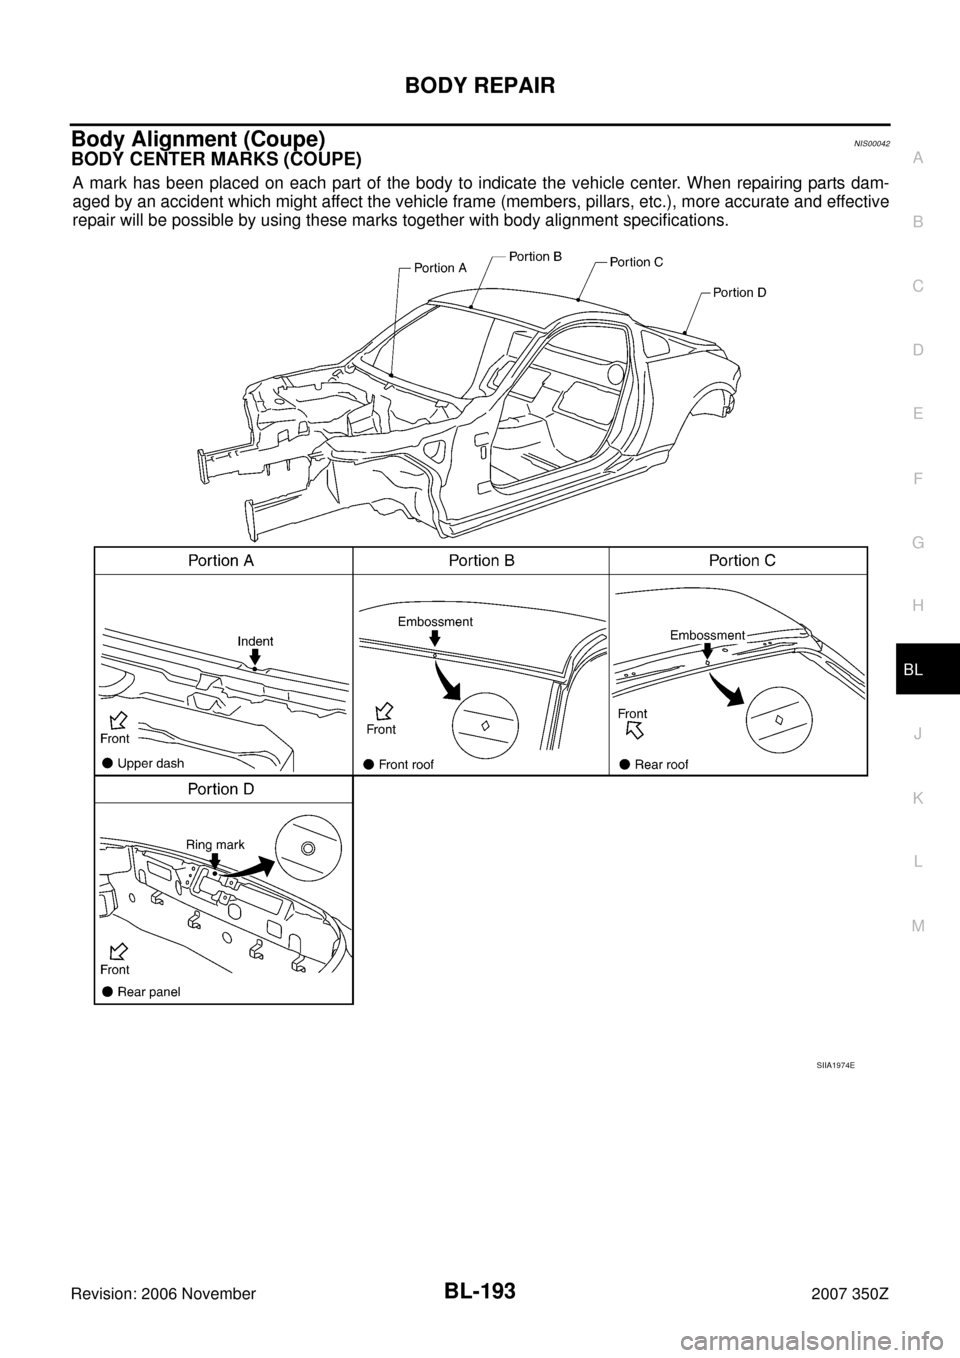 NISSAN 350Z 2007 Z33 Body, Lock And Security System Workshop Manual BODY REPAIR
BL-193
C
D
E
F
G
H
J
K
L
MA
B
BL
Revision: 2006 November2007 350Z
Body Alignment (Coupe)NIS00042
BODY CENTER MARKS (COUPE)
A mark has been placed on each part of the body to indicate the v